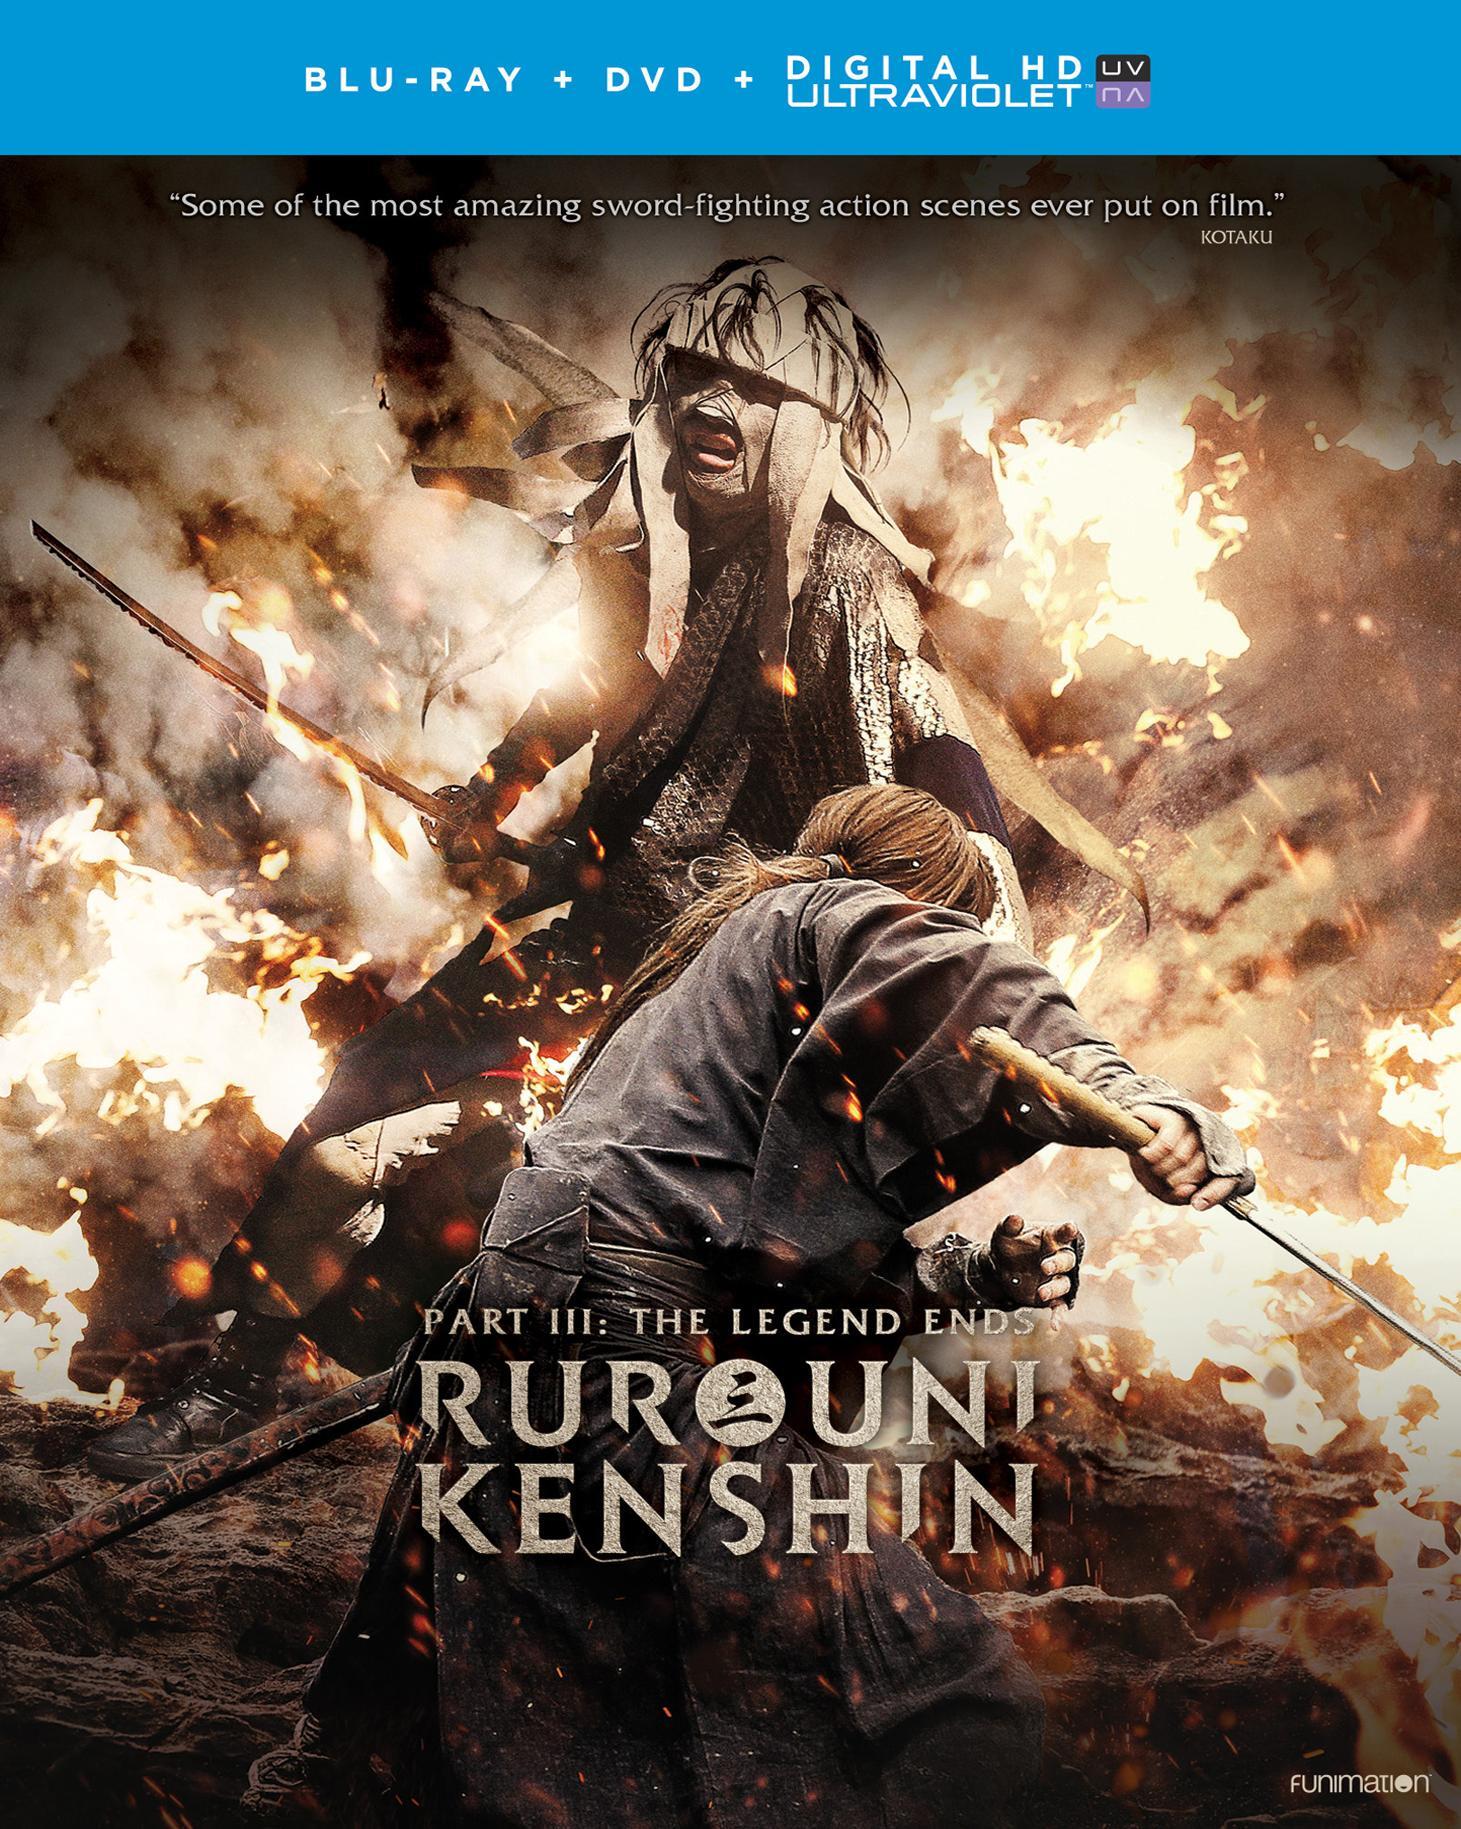 Rurouni Kenshin: Part III - The Legend Ends (with DVD) - Blu-ray [ 2014 ]  - Foreign Movies On Blu-ray - Movies On GRUV